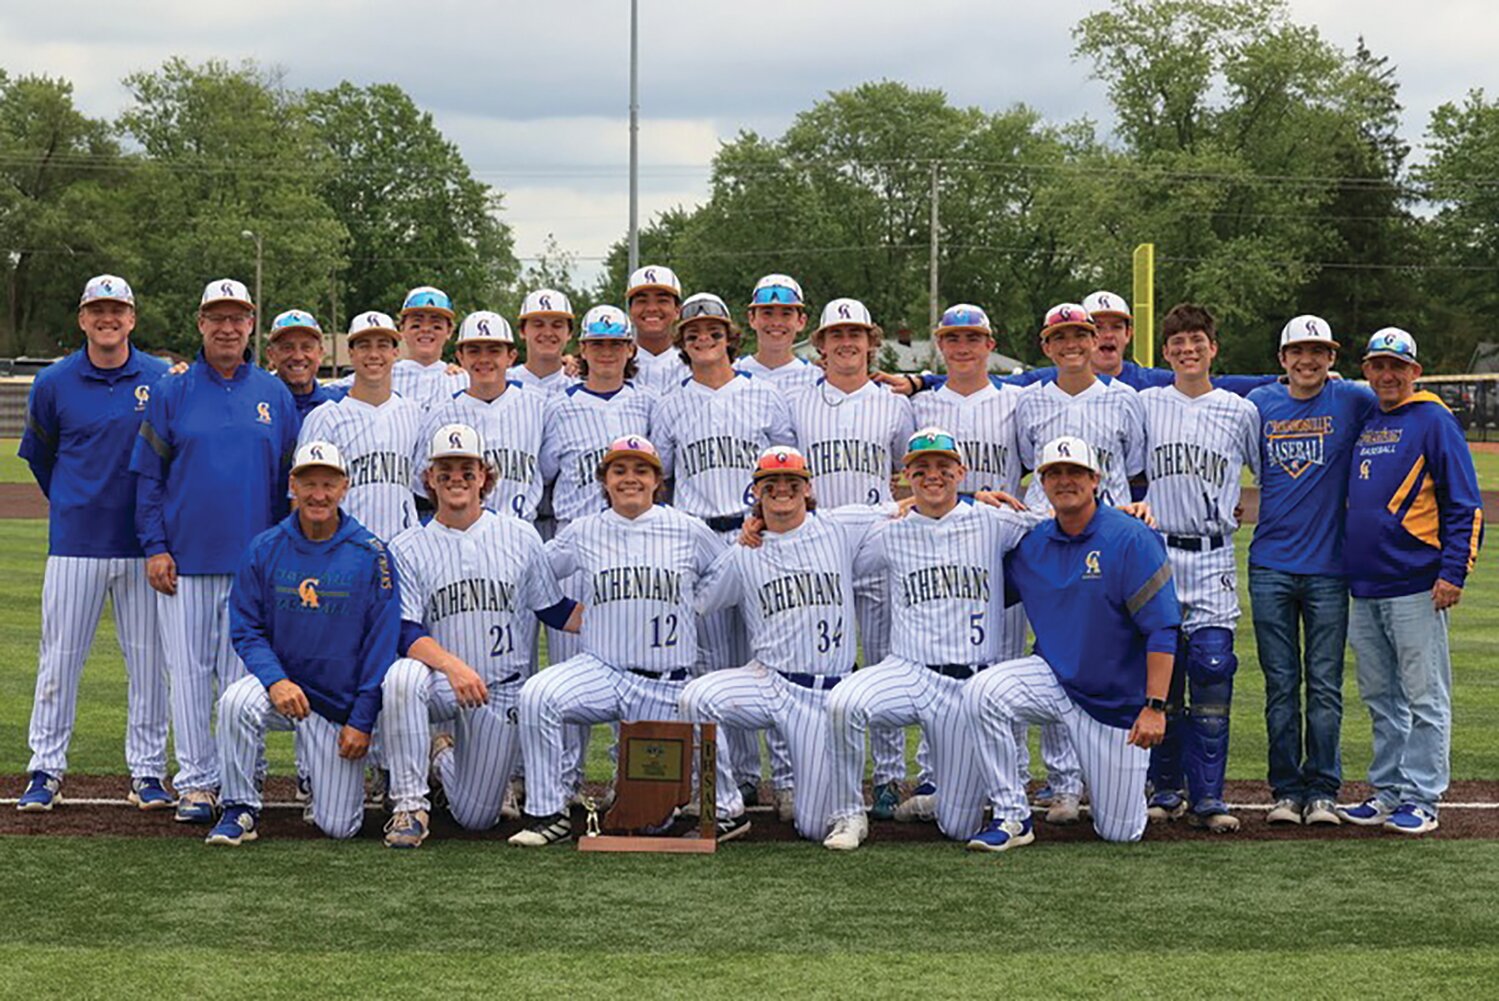 For the 1st time since 2013 and the 18th time in program history, Crawfordsville baseball won the sectional title with a 9-1 win over Western Boone.